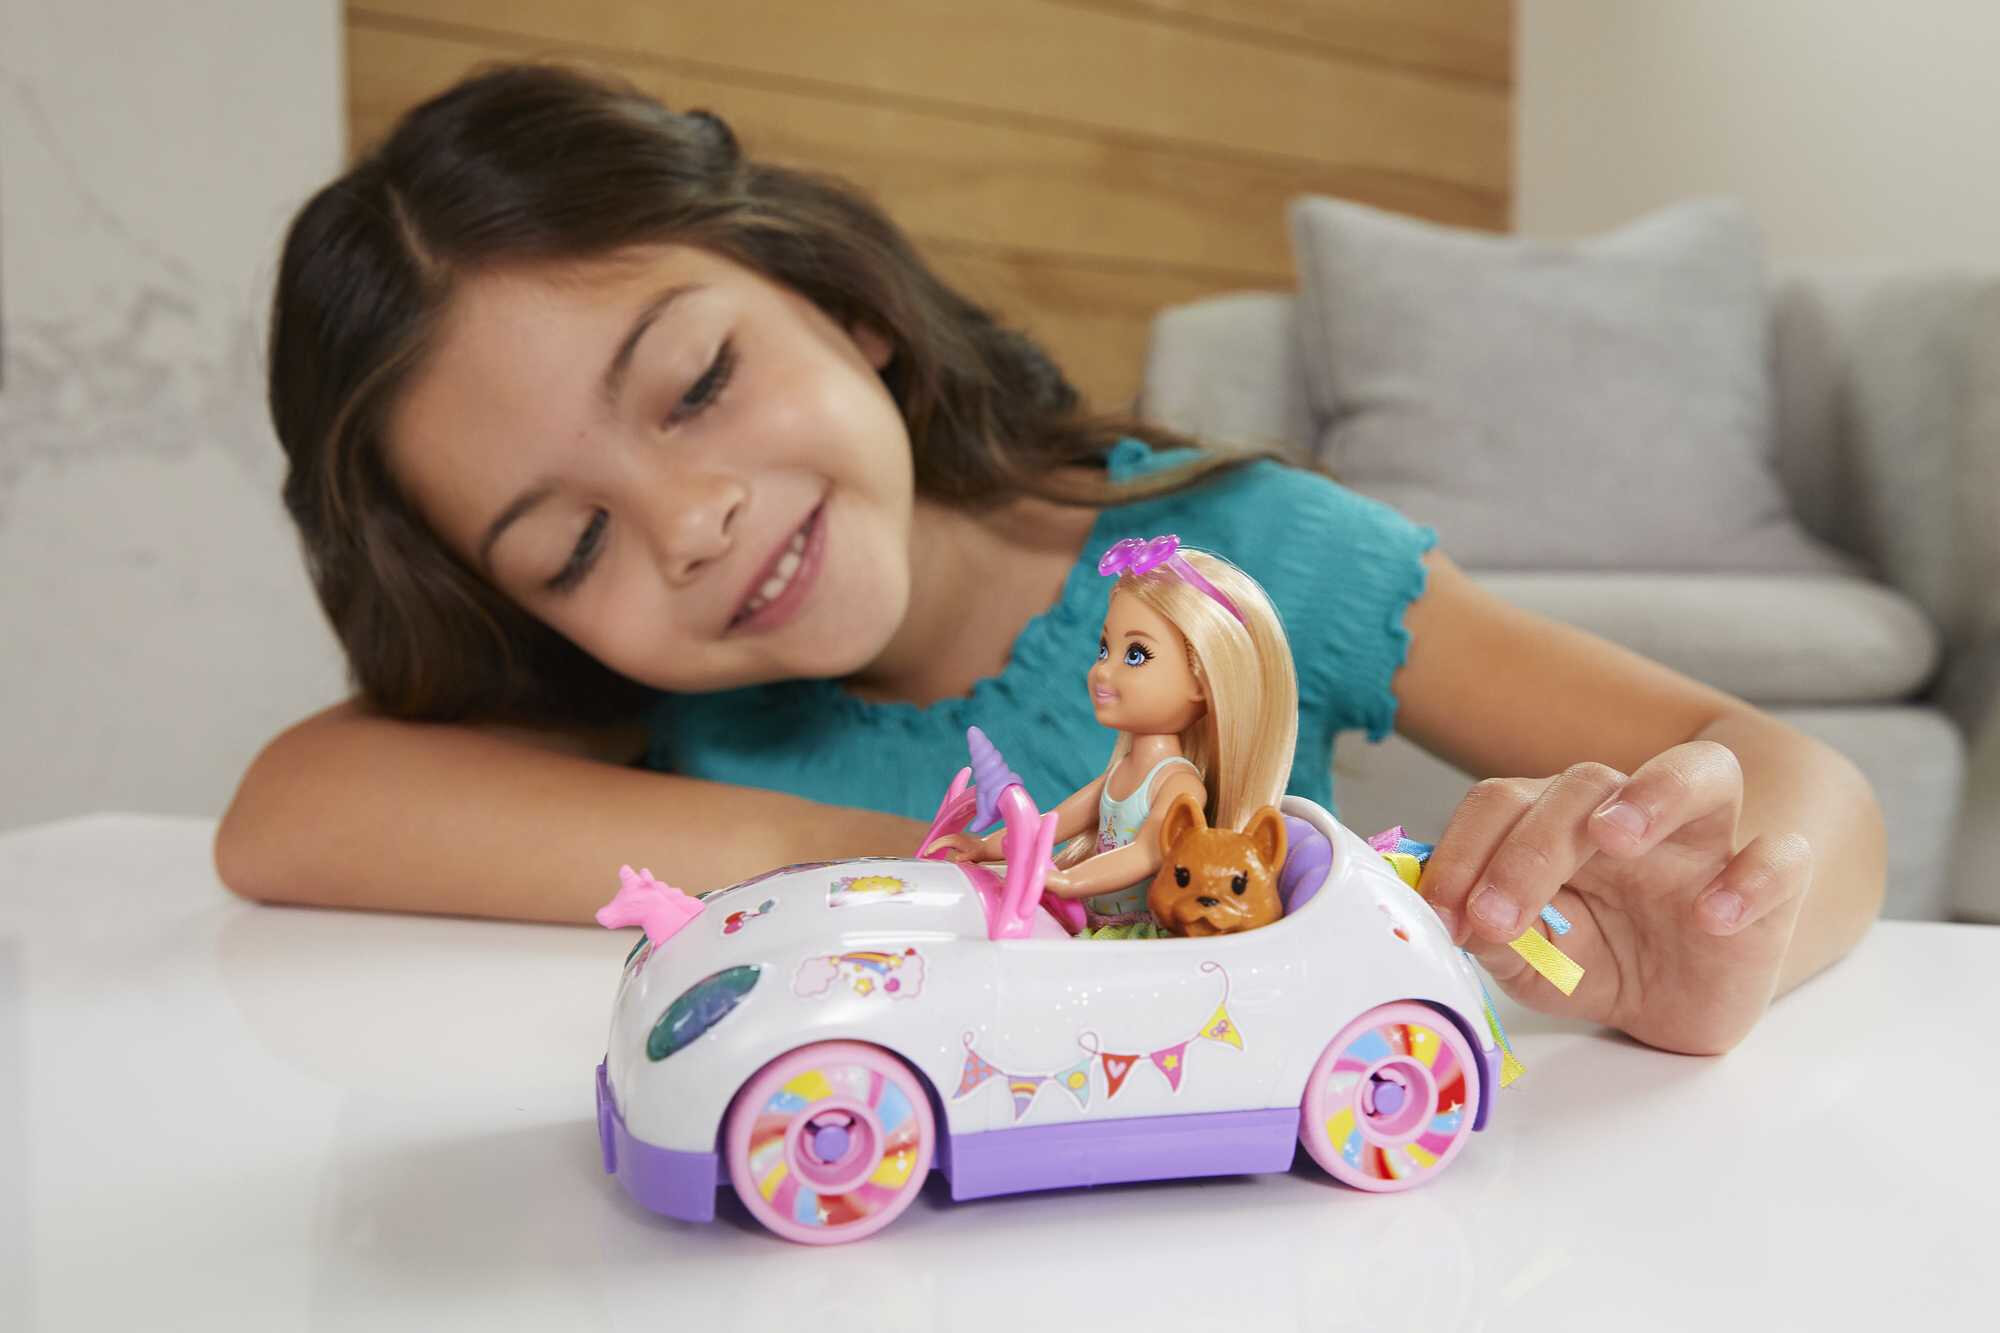 Barbie Club Chelsea Doll & Toy Car, Unicorn Theme, Blonde Small Doll, Puppy, Stickers & Accessories - image 2 of 6